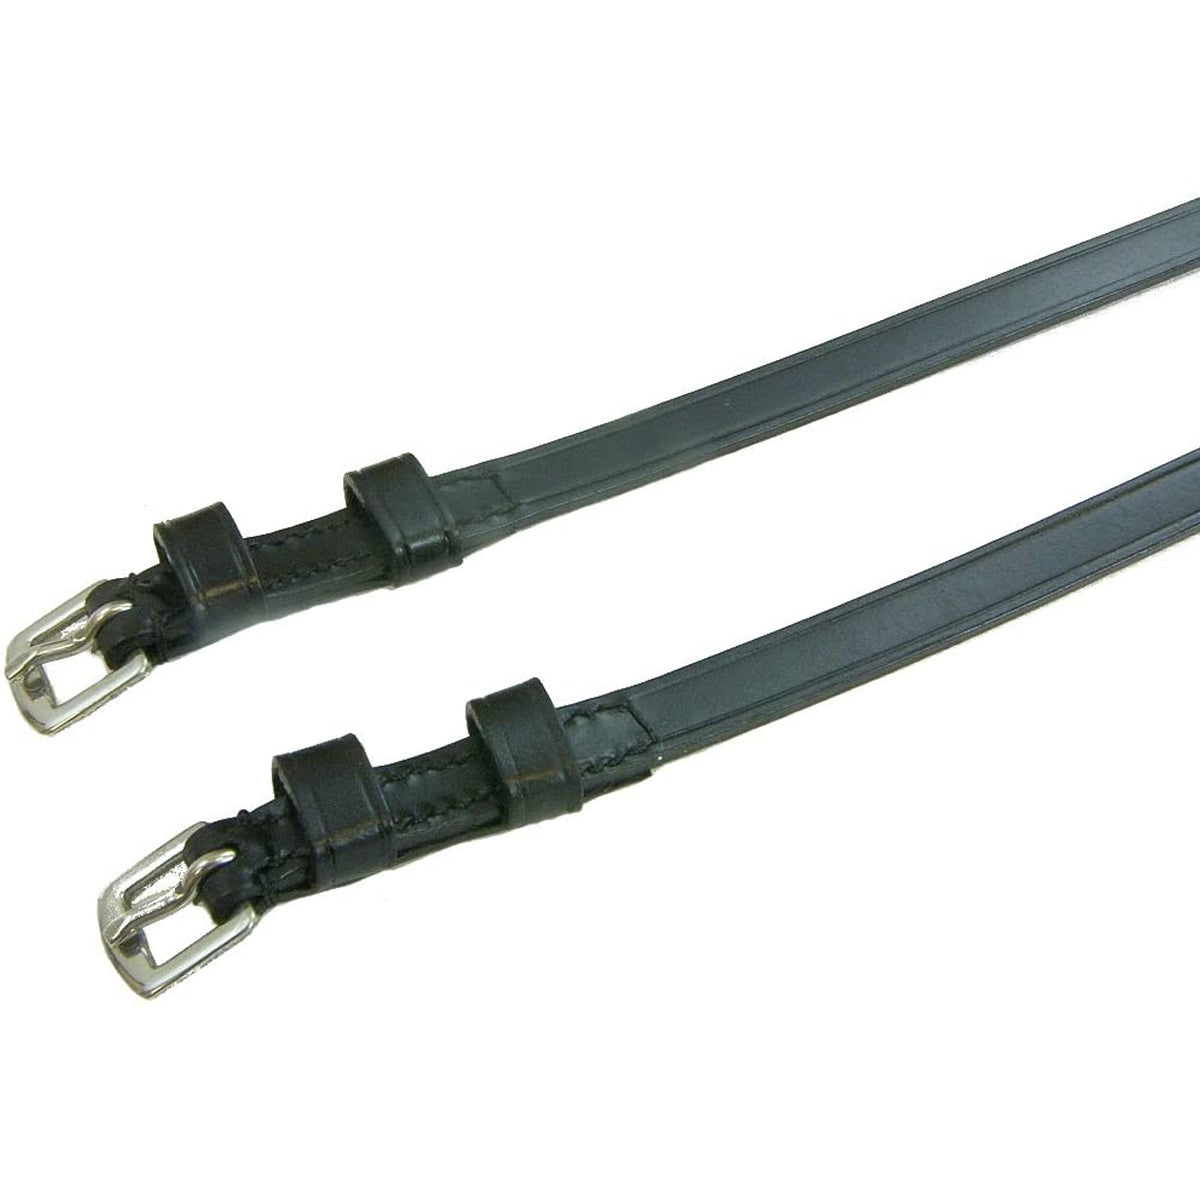 Exselle Double Keeper Spur Strap